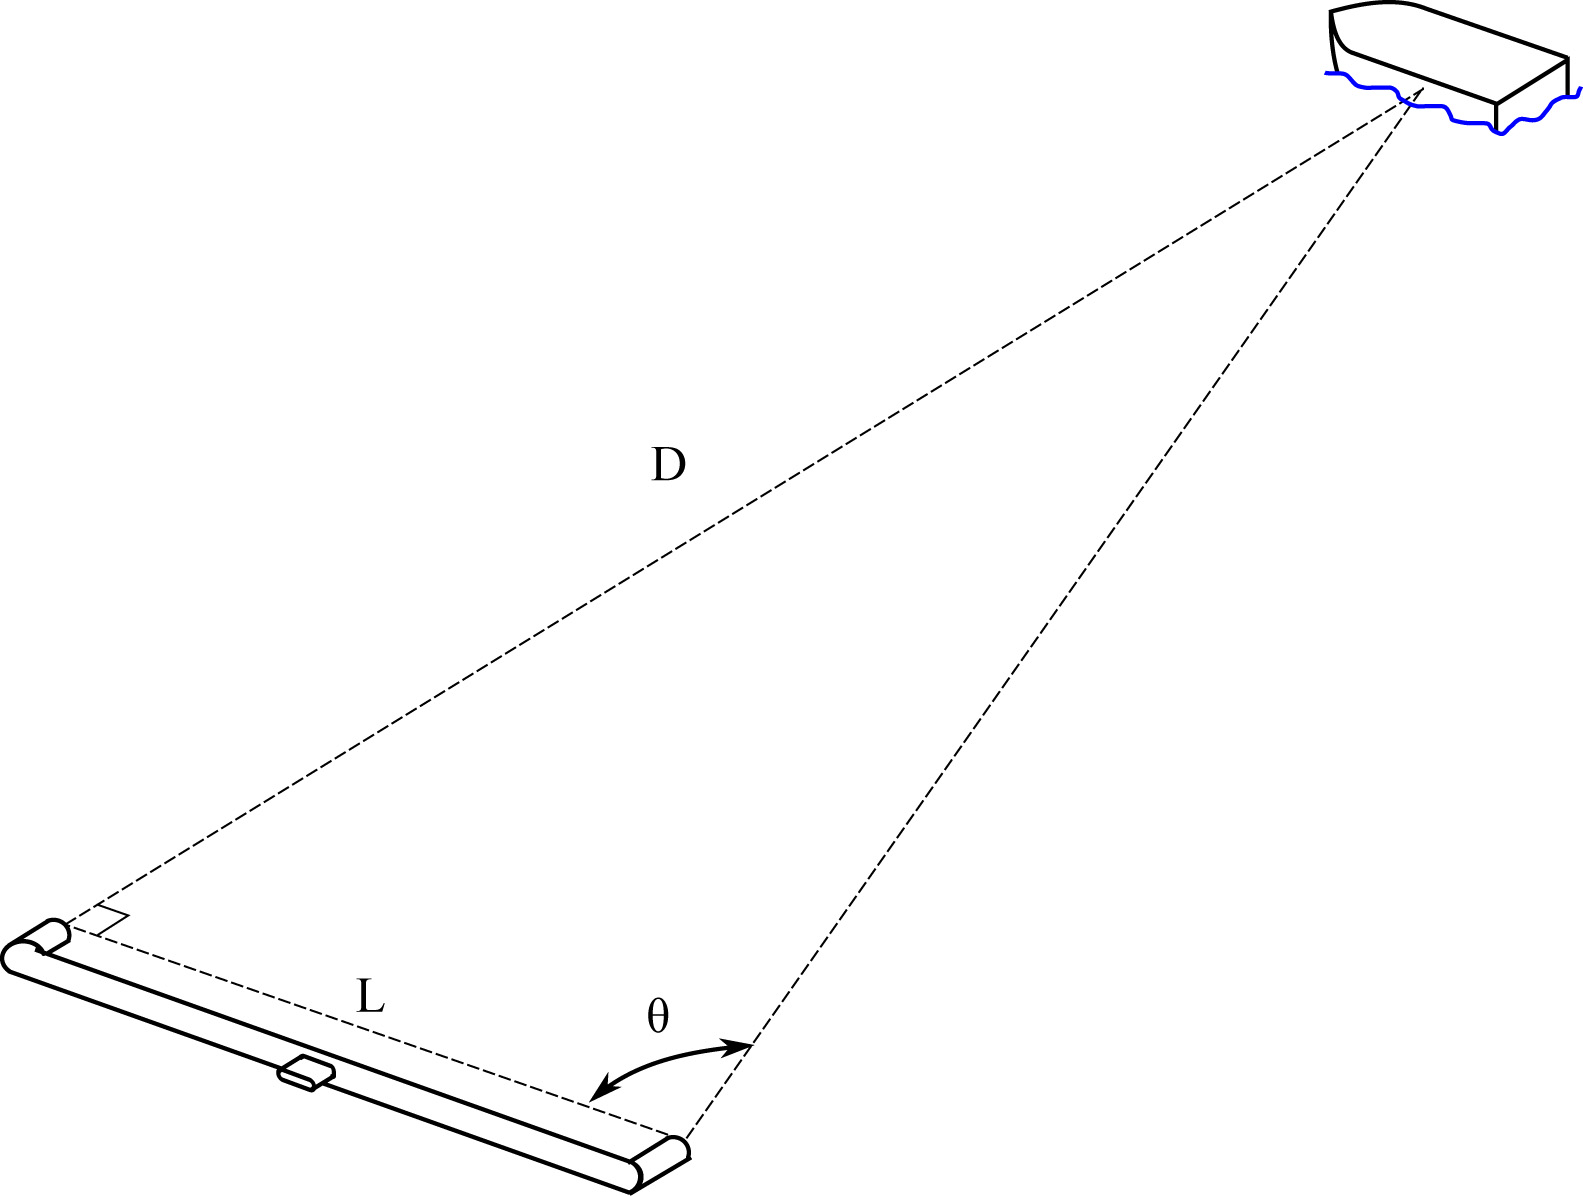 Measuring distances using triangulation. Cdang/CC BY-SA (https:/creativecommons.org/licenses/by-sa/3.0); 